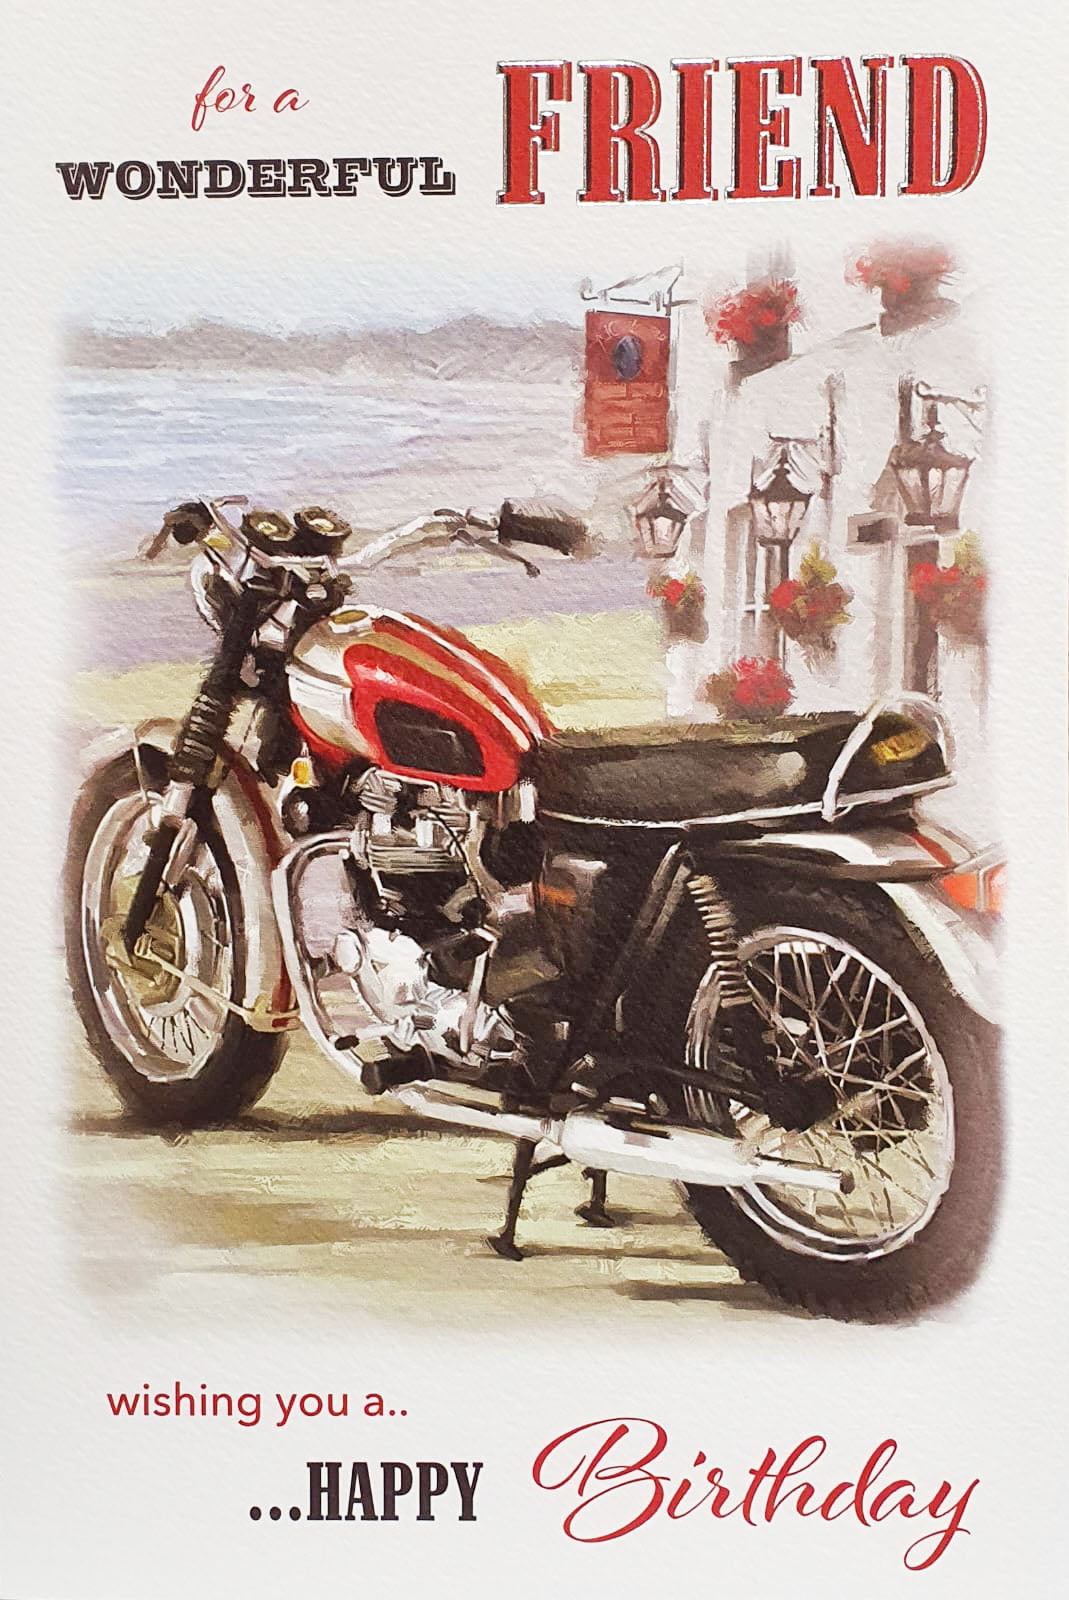 Friend Birthday Card - A Red Motorcycle